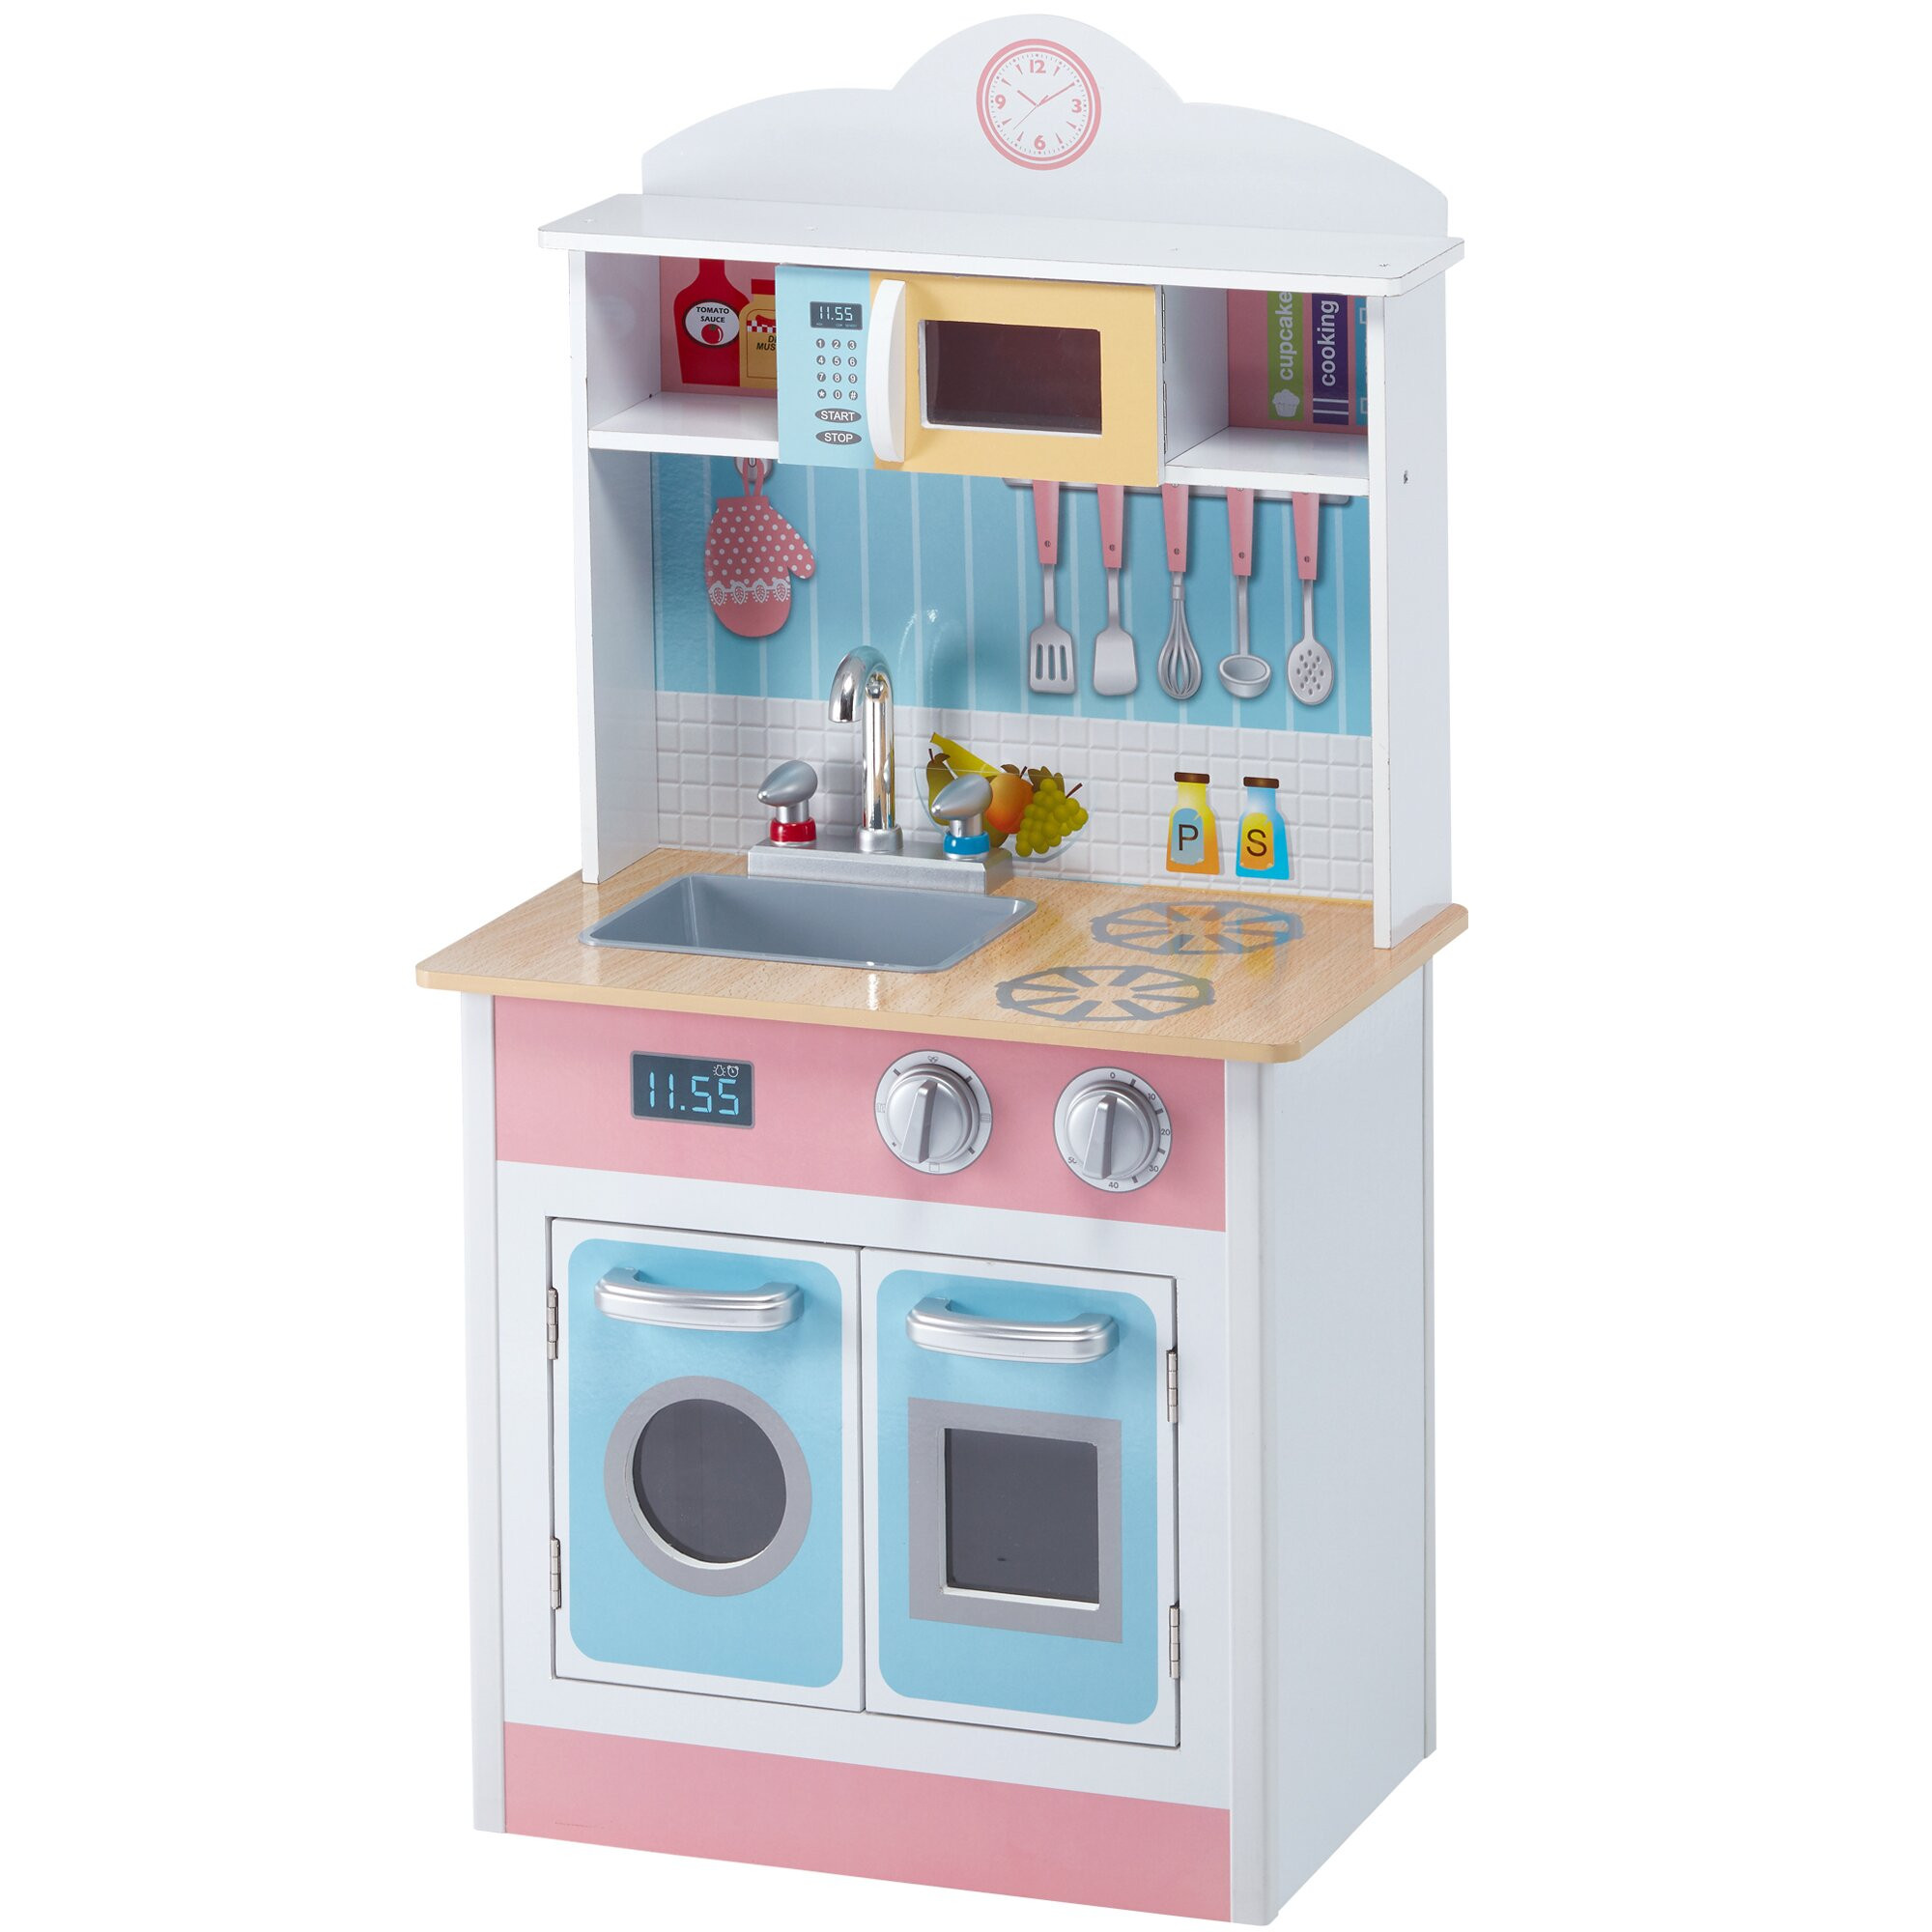 Small Play Kitchen
 Teamson Kids My Little Chef Pastel Small Play Kitchen